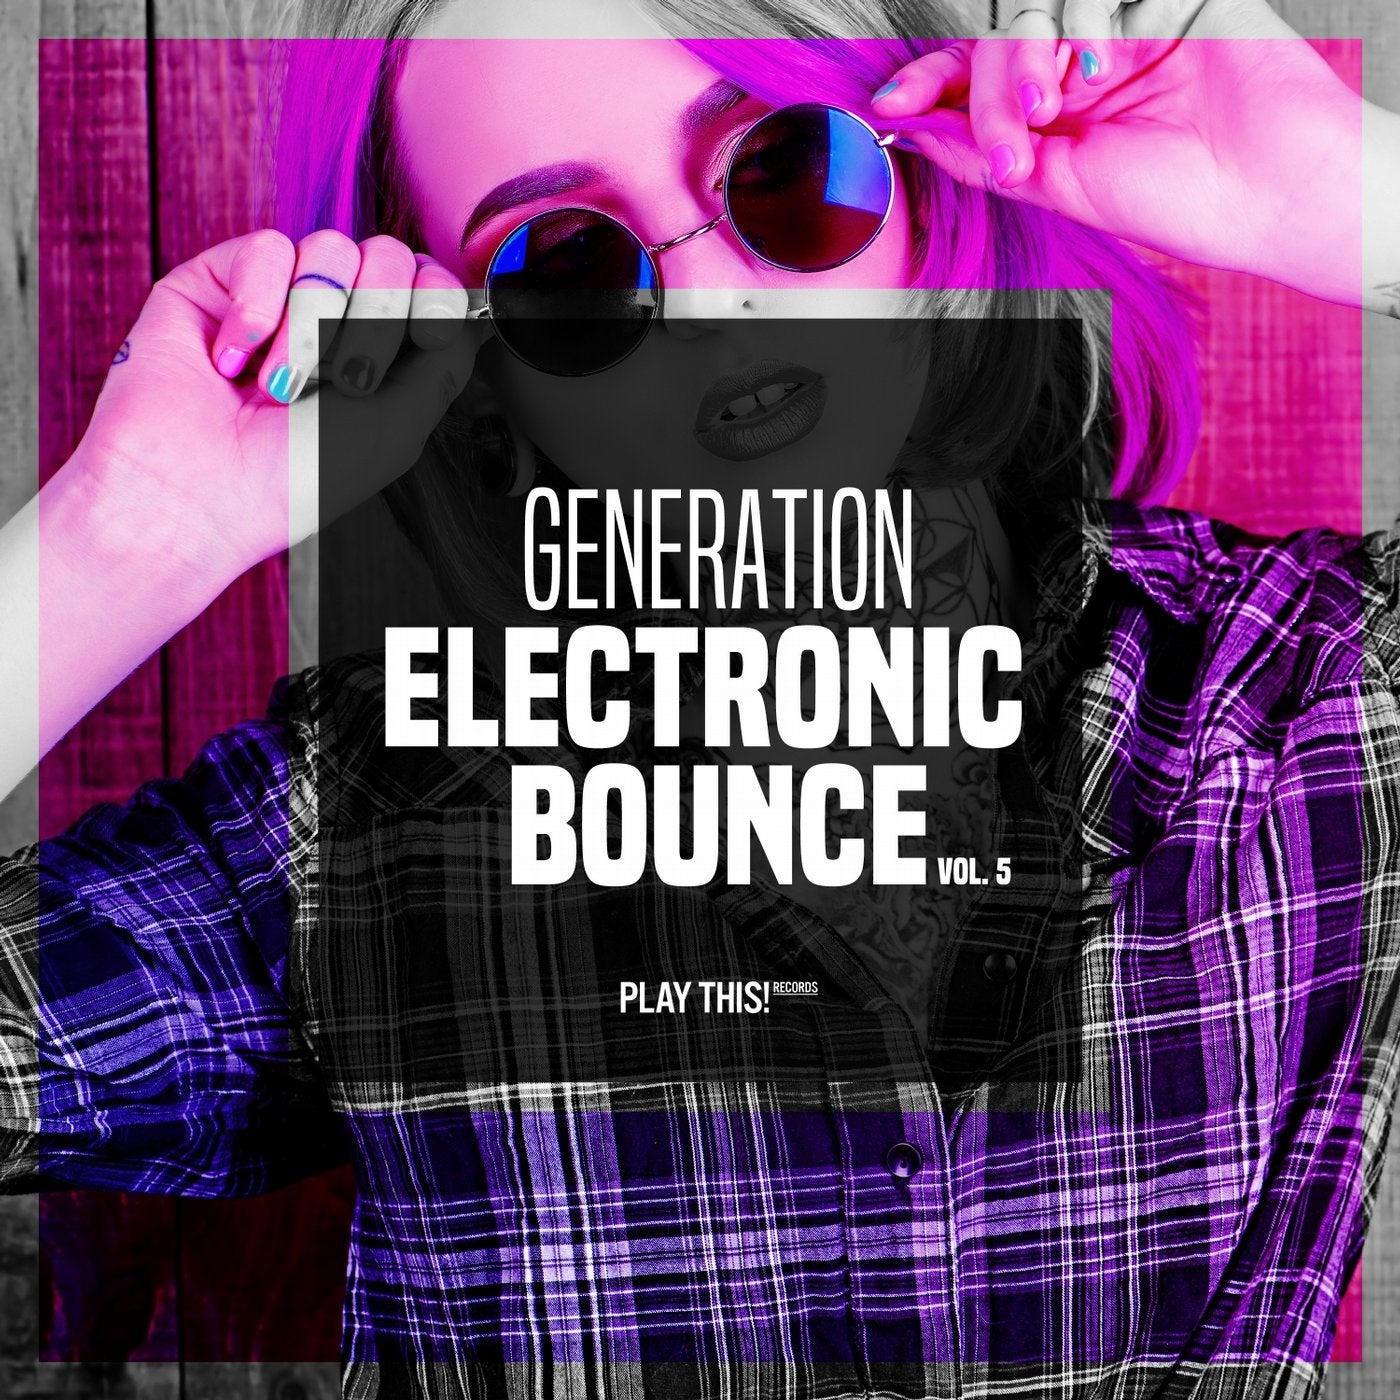 Generation Electronic Bounce Vol. 5